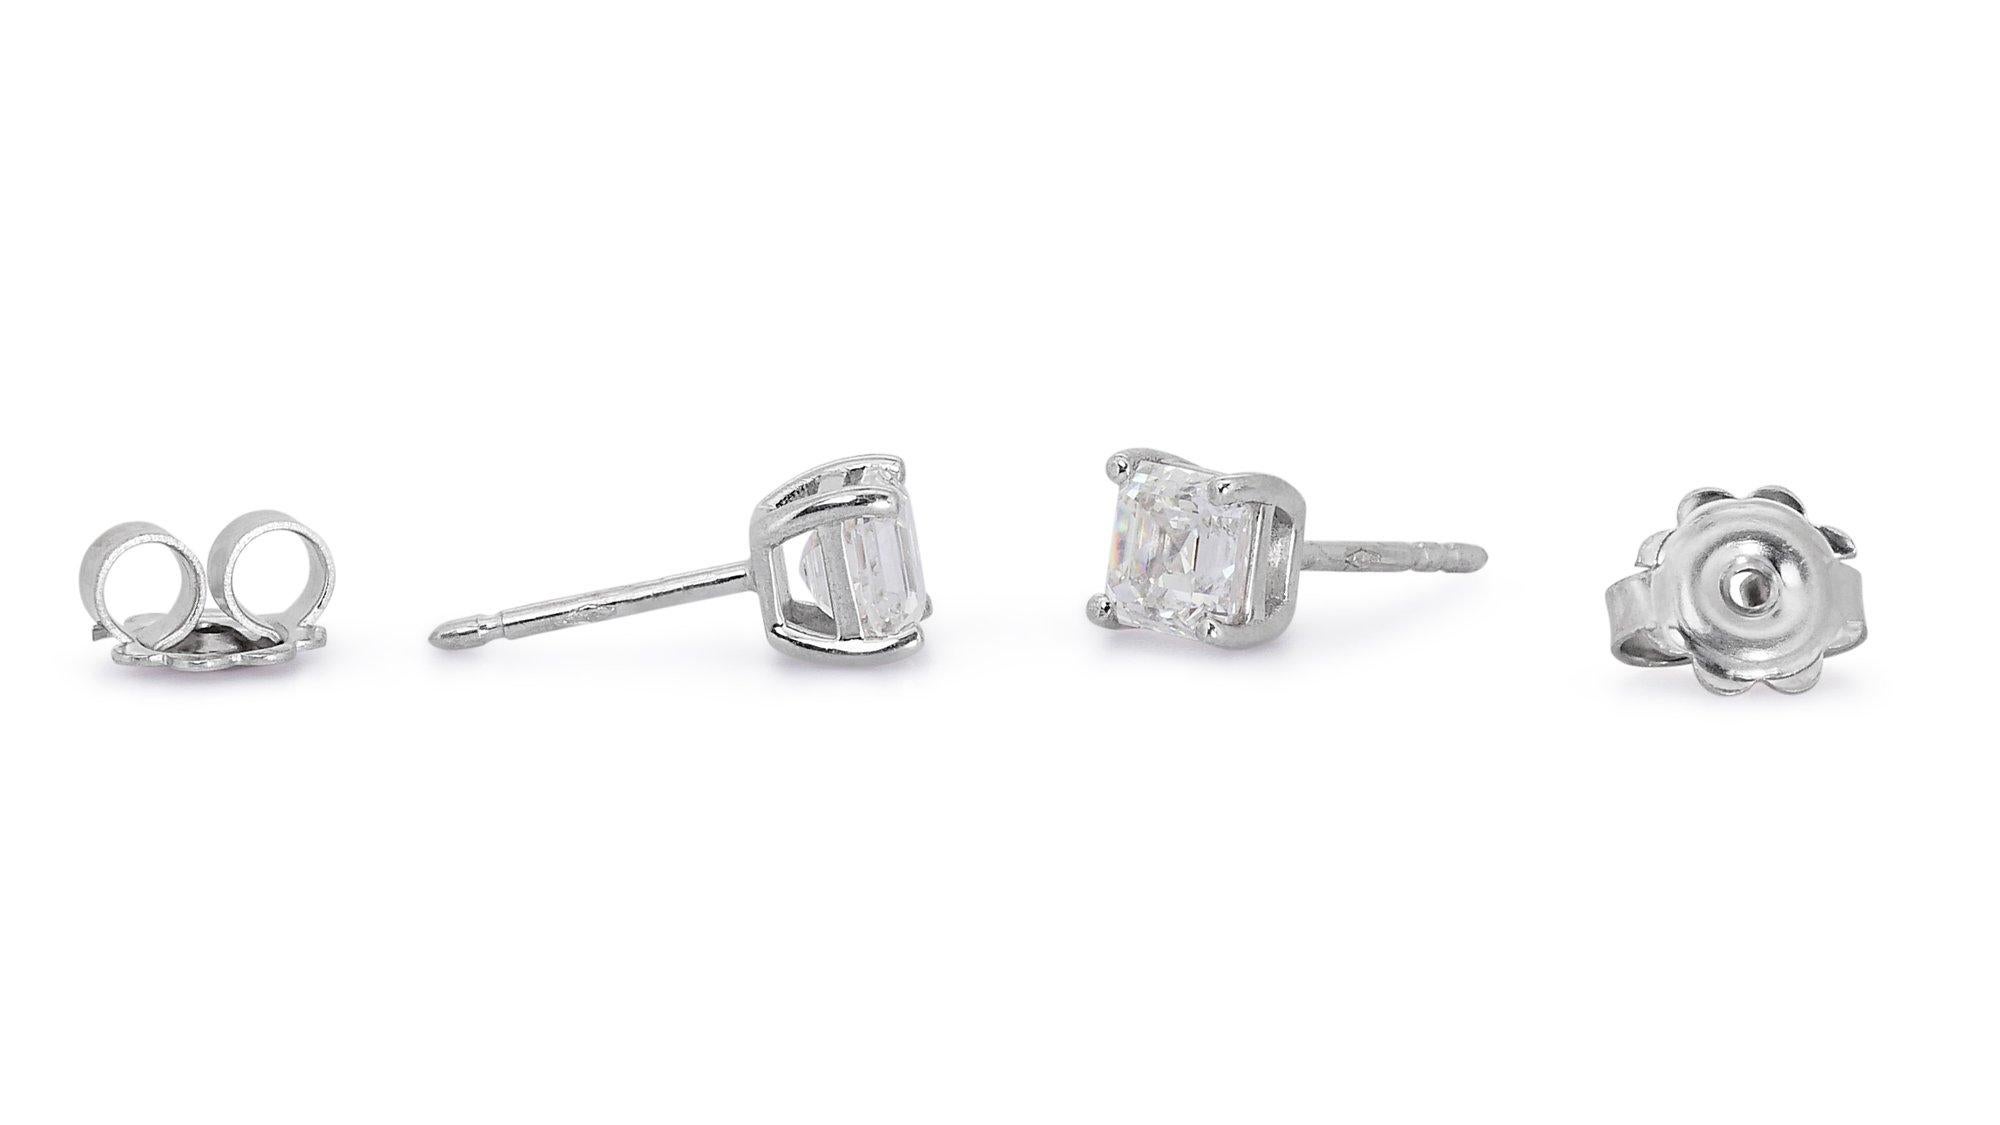 Timeless 2.05ct Diamond Stud Earrings in 18k White Gold - GIA Certified For Sale 2